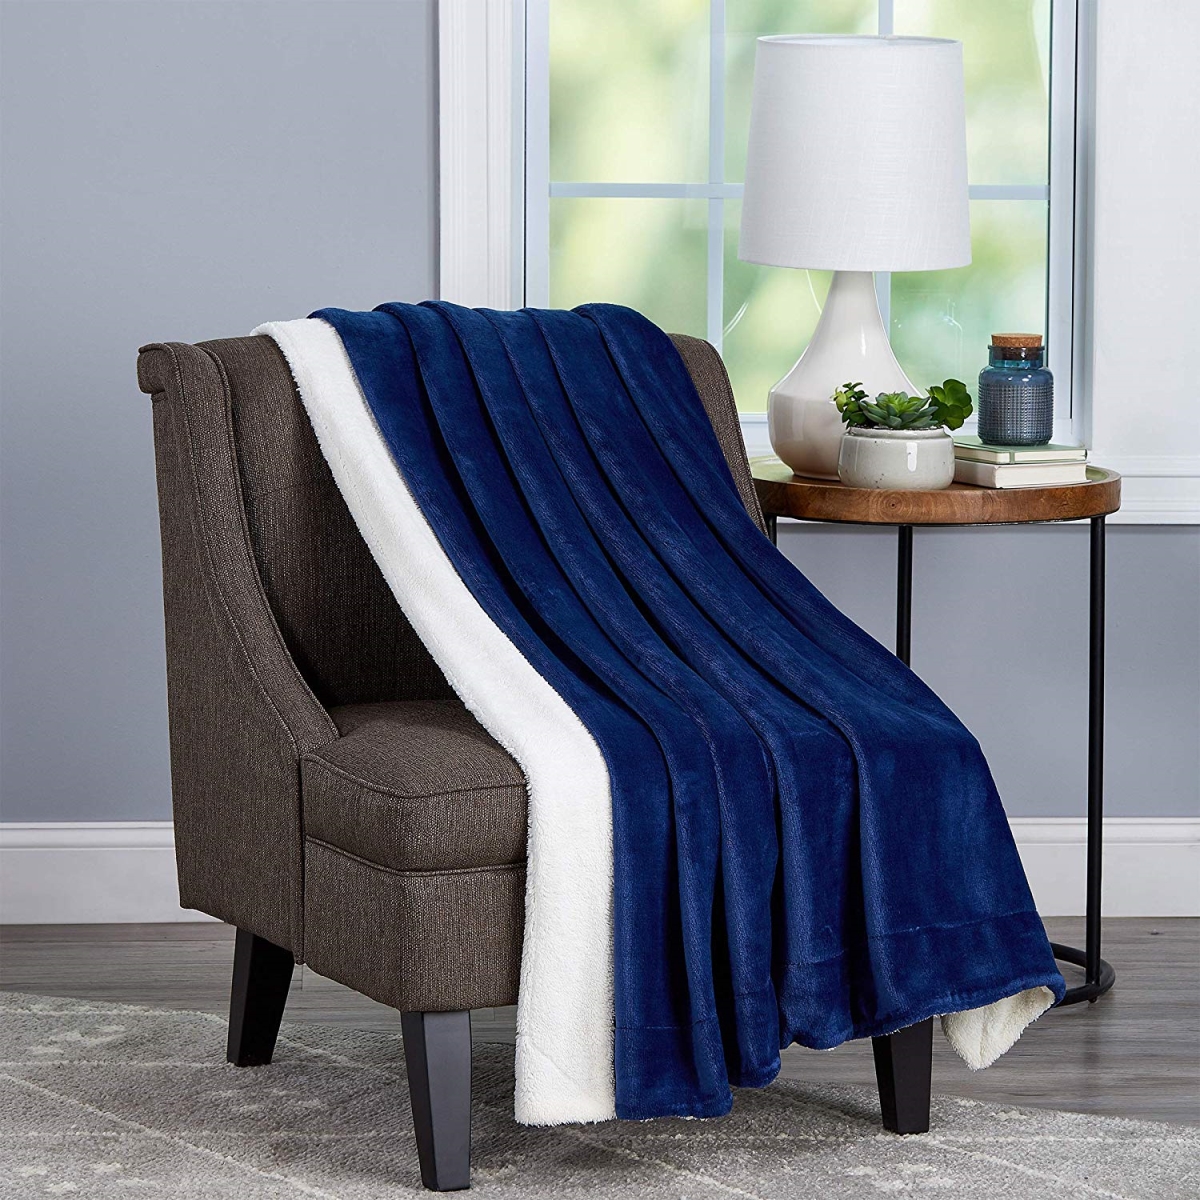 66a-29218 Poly Oversized Plush Woven Polyester Sherpa Fleece Solid Color Throw - Midnight & White